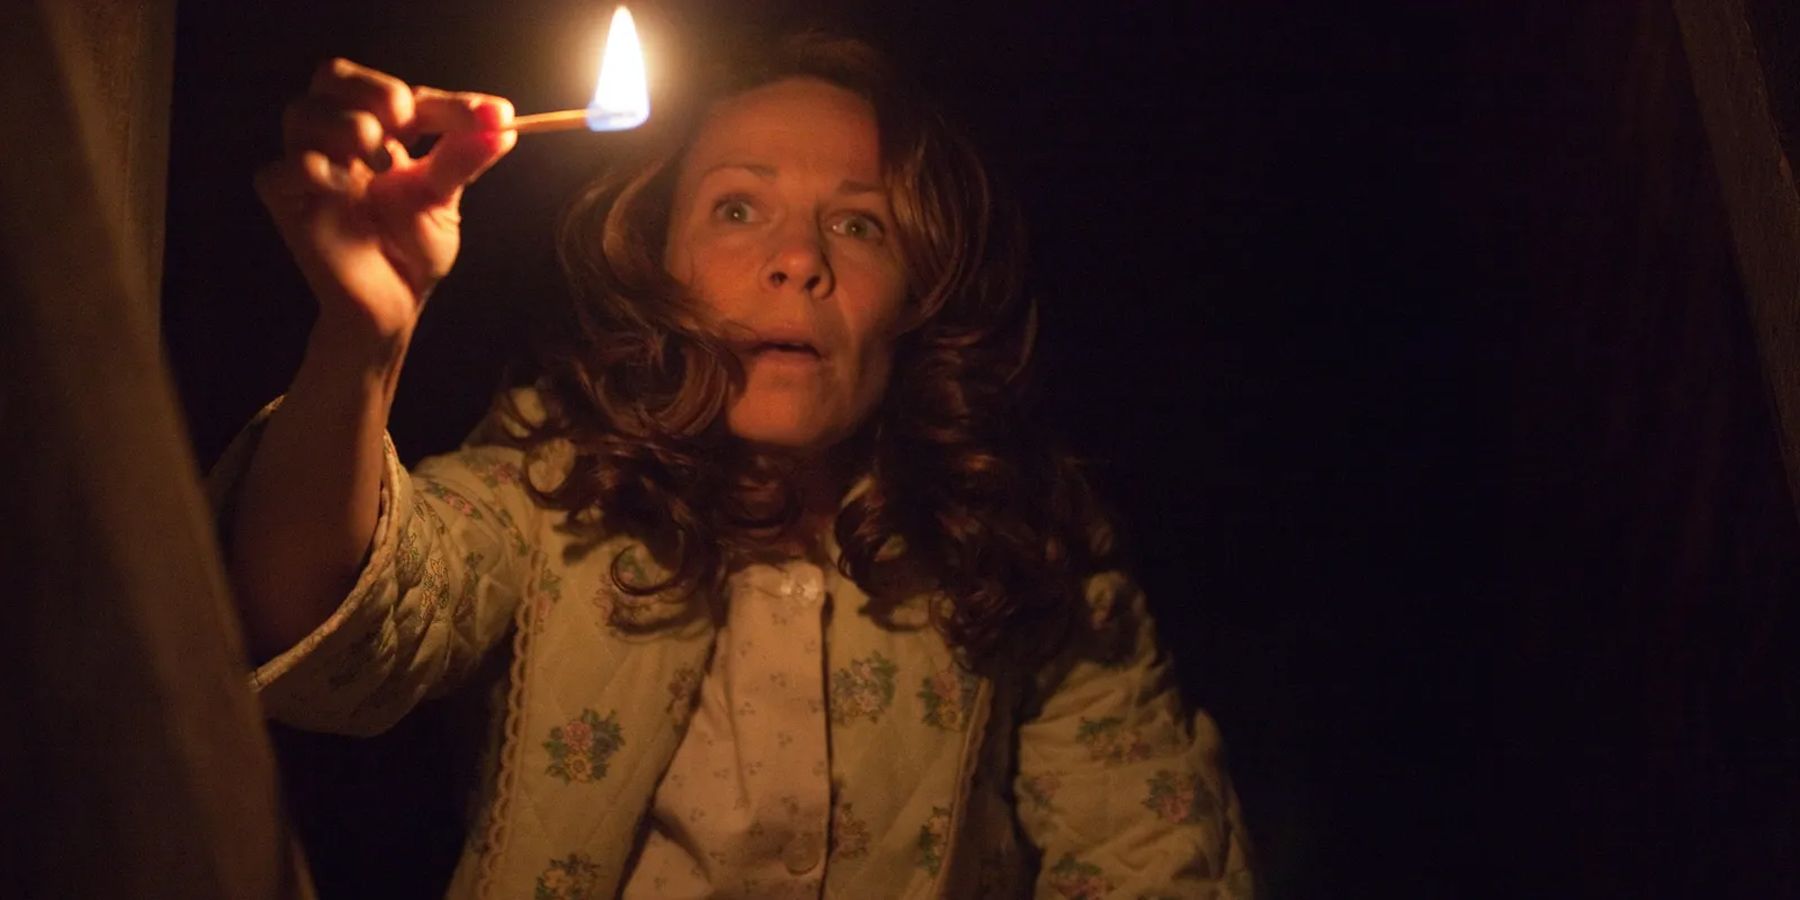 The Conjuring holding a match in a dark space